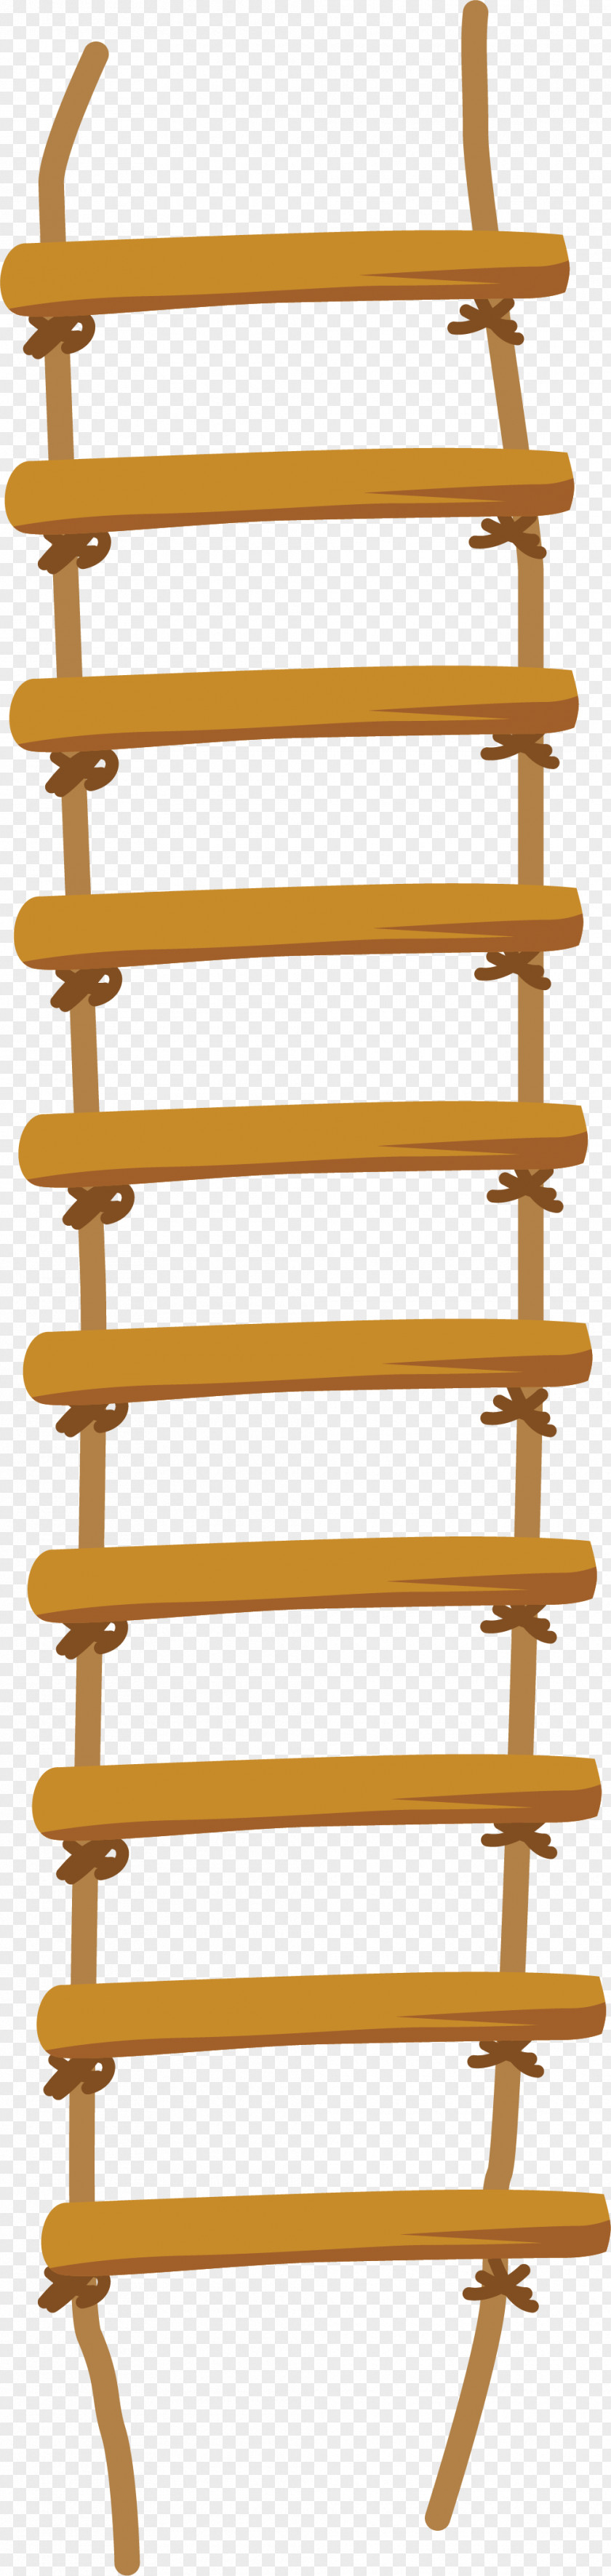 Ladder Fall Rope Television Image PNG